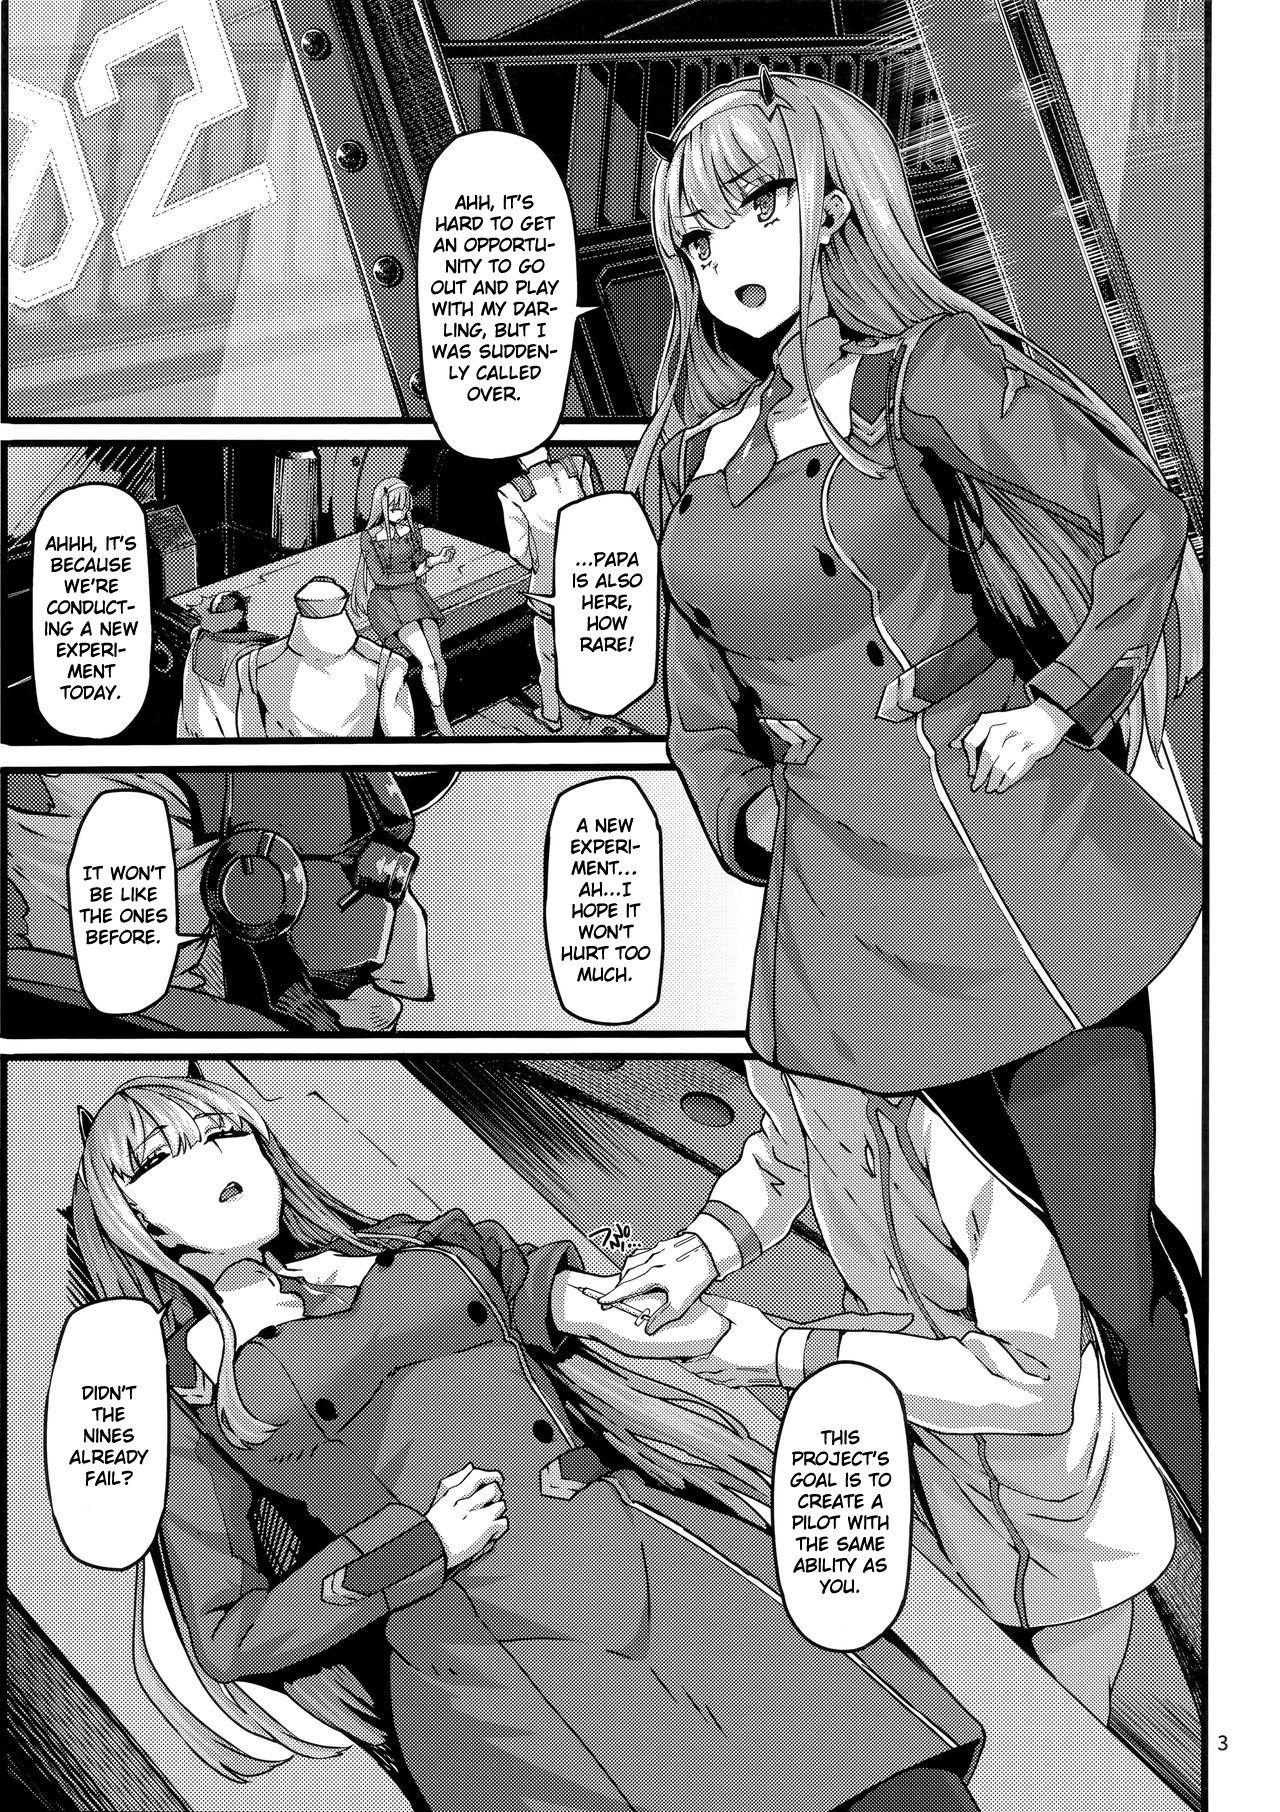 Bang reginae - Darling in the franxx Wet Cunts - Page 2